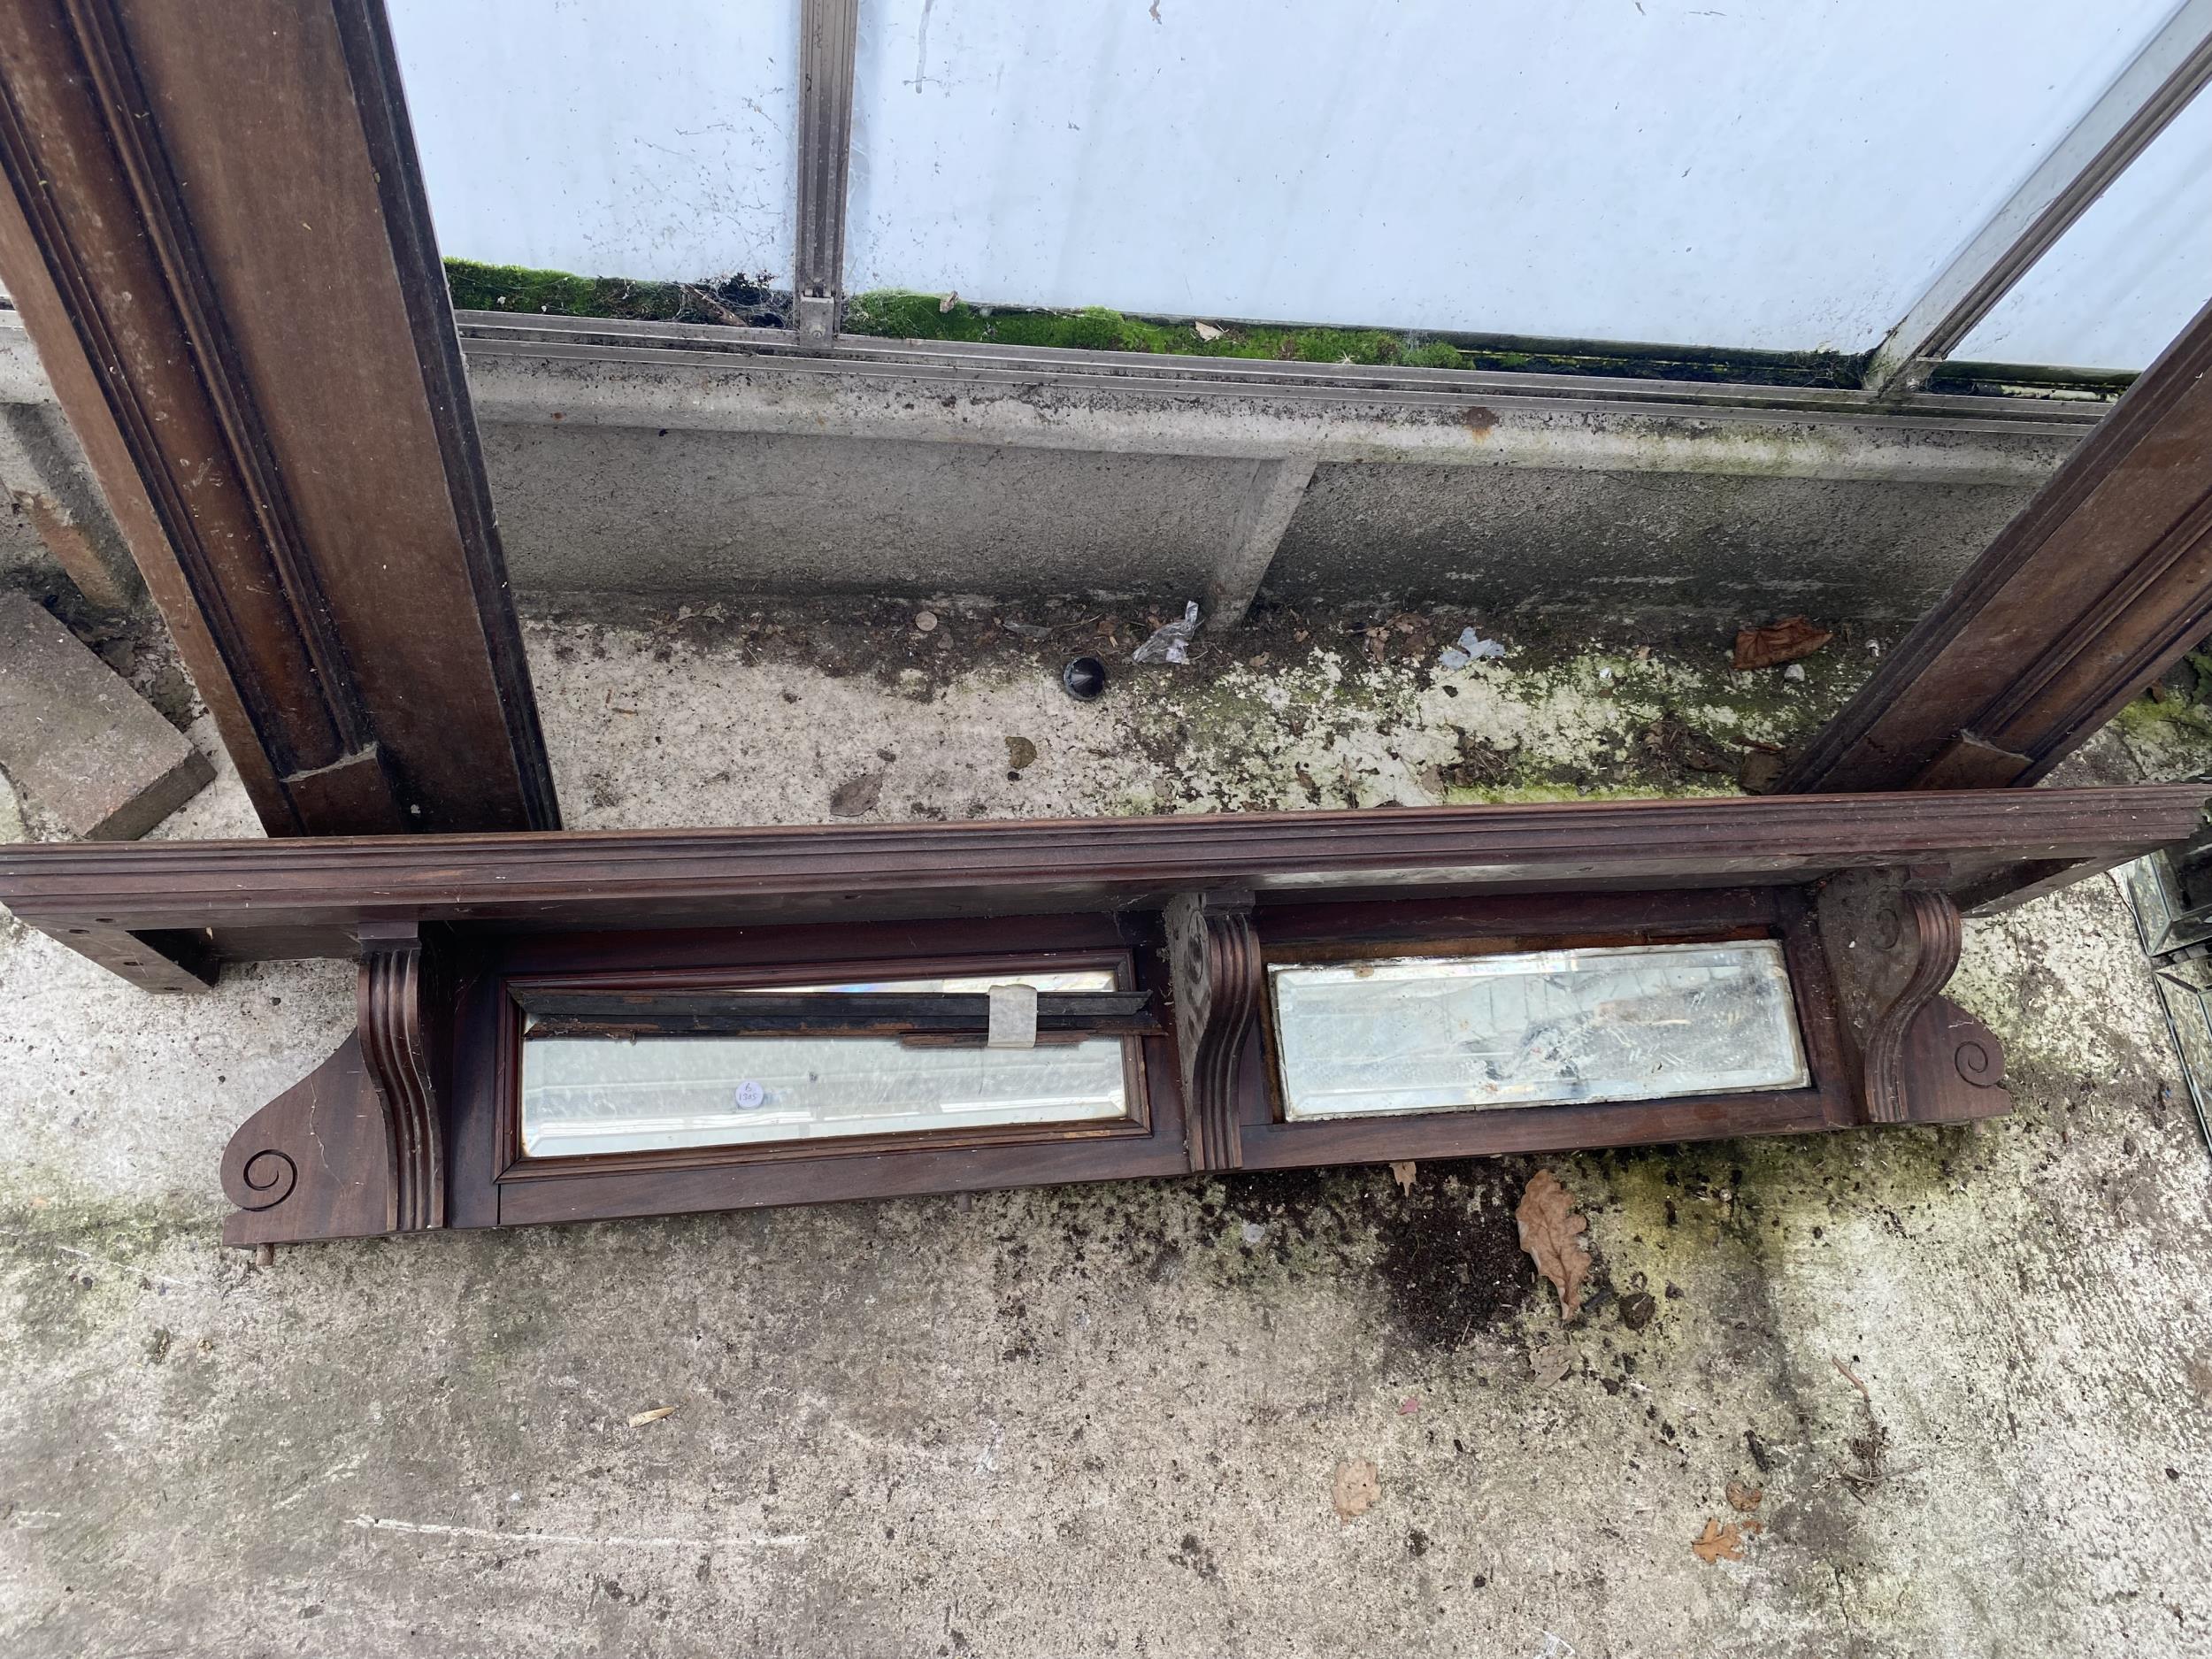 A WOODEN FIRE SURROUND AND A MIRRORED MANTEL SHELF - Image 2 of 2